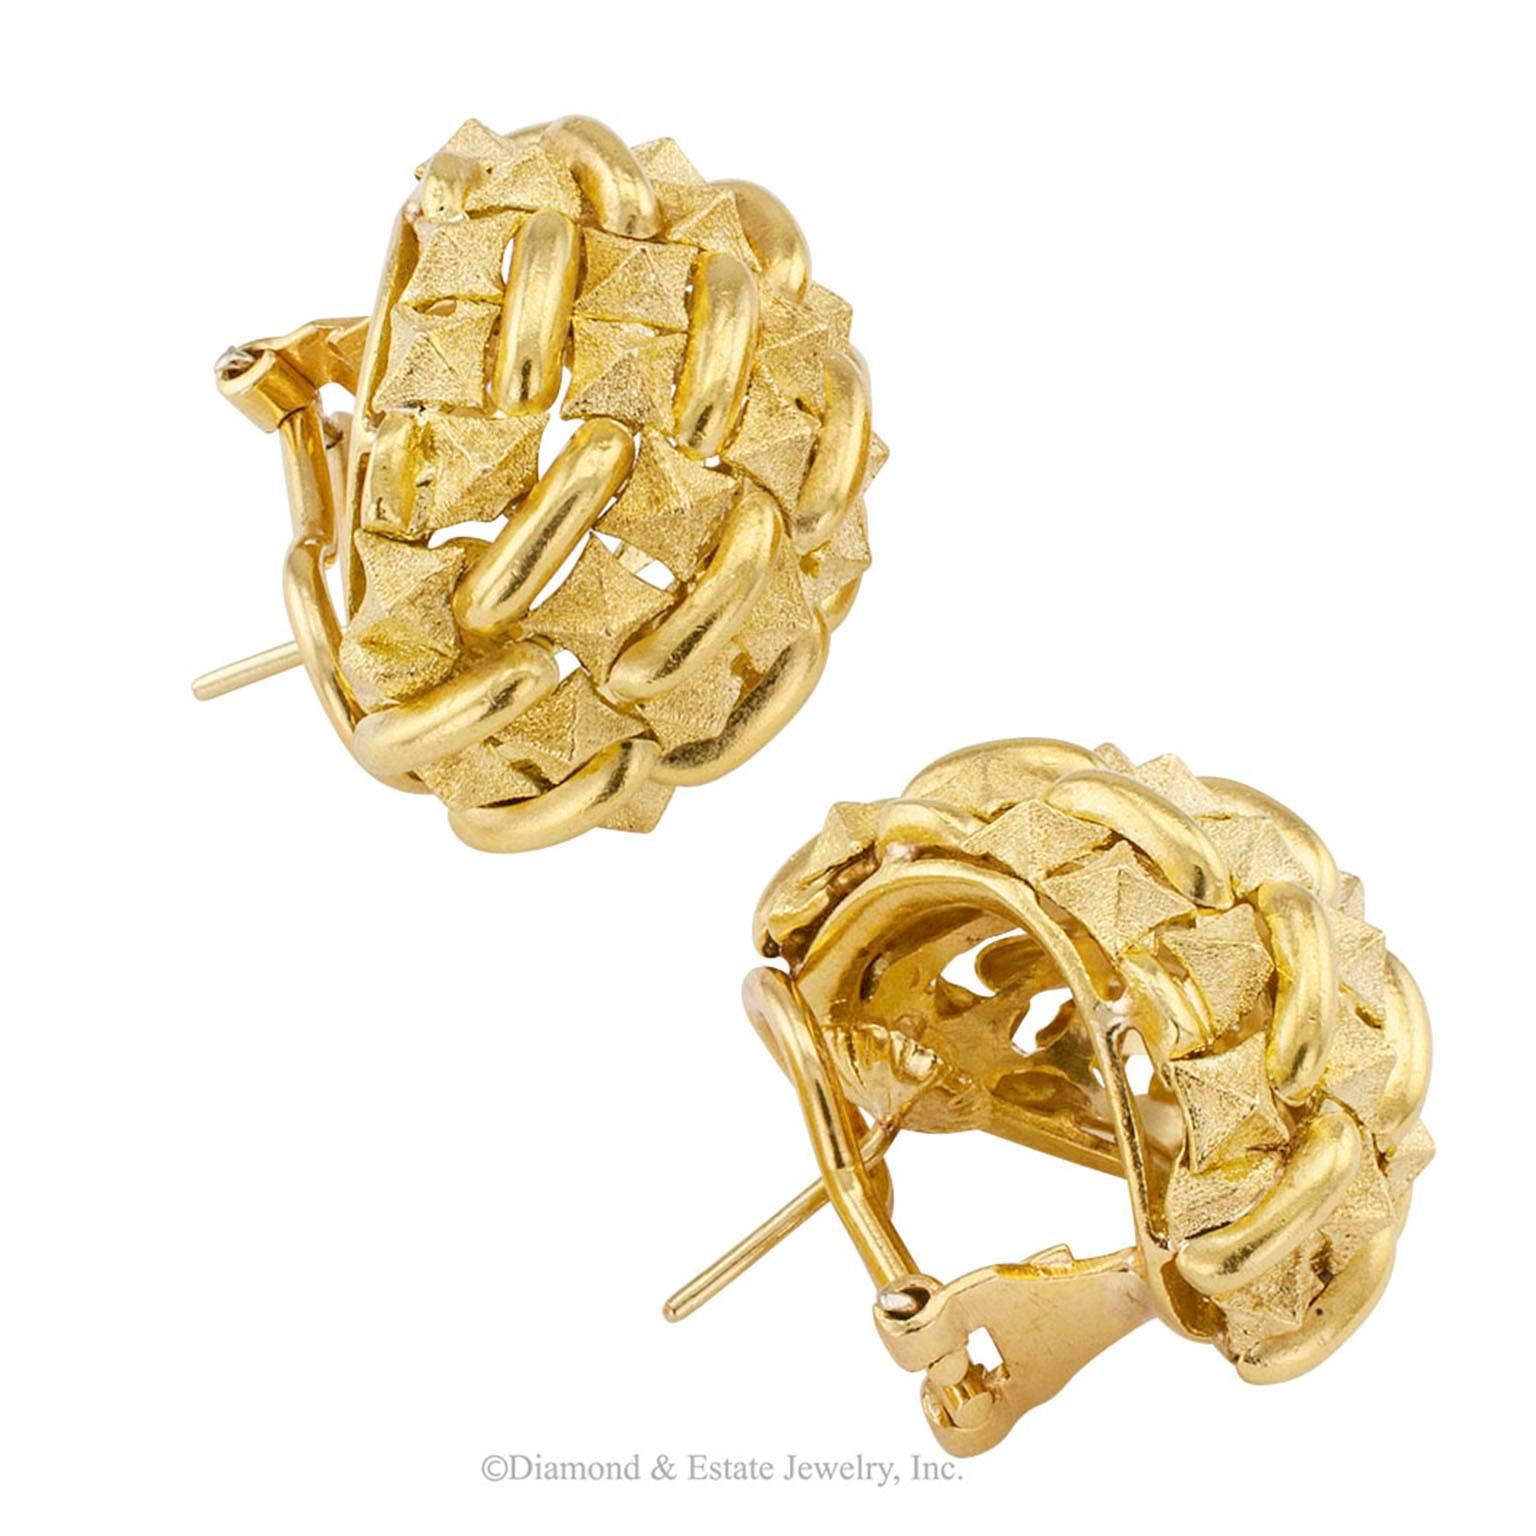 1970s Domed Earrings Textured Gold

Estate 1970s domed textured 18-karat gold earrings.  The matching designs feature a neatly arranged, tight pattern of geometric shapes comprishing twin square piramids finished in matt gold, between oblong